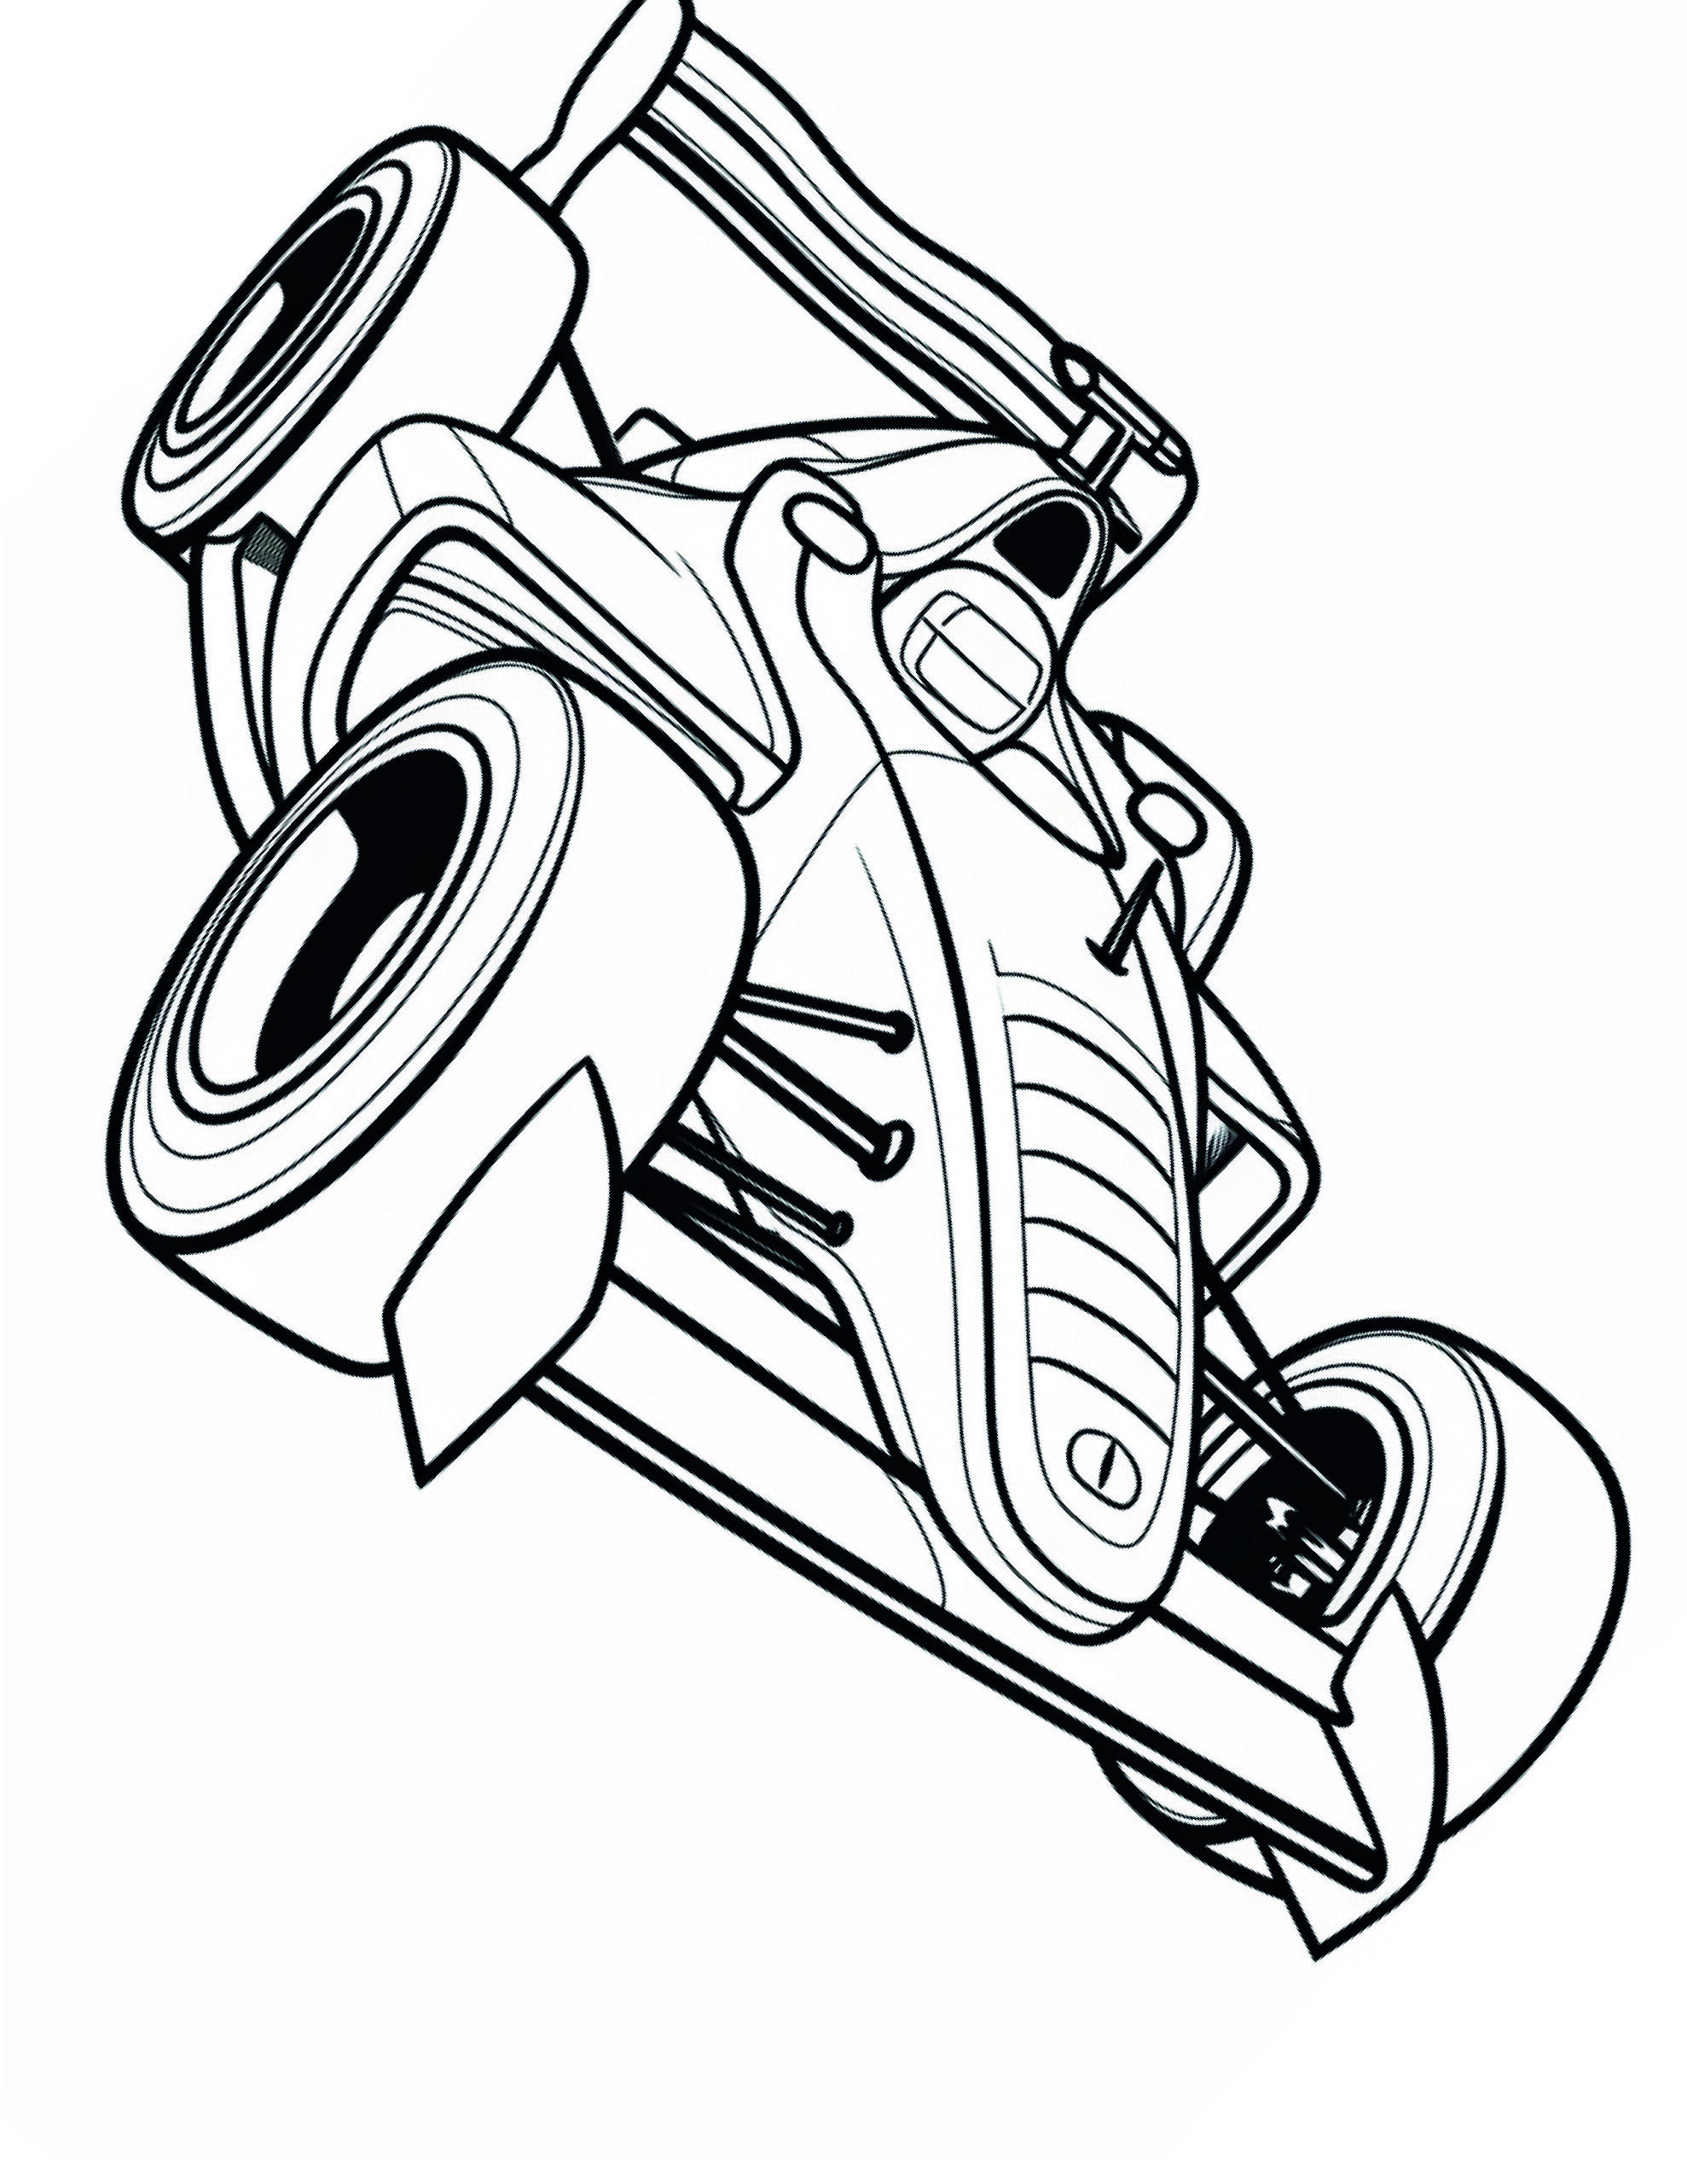 Race Car Coloring Page 3 - A line drawing of a formula one car in a black outline with white background.